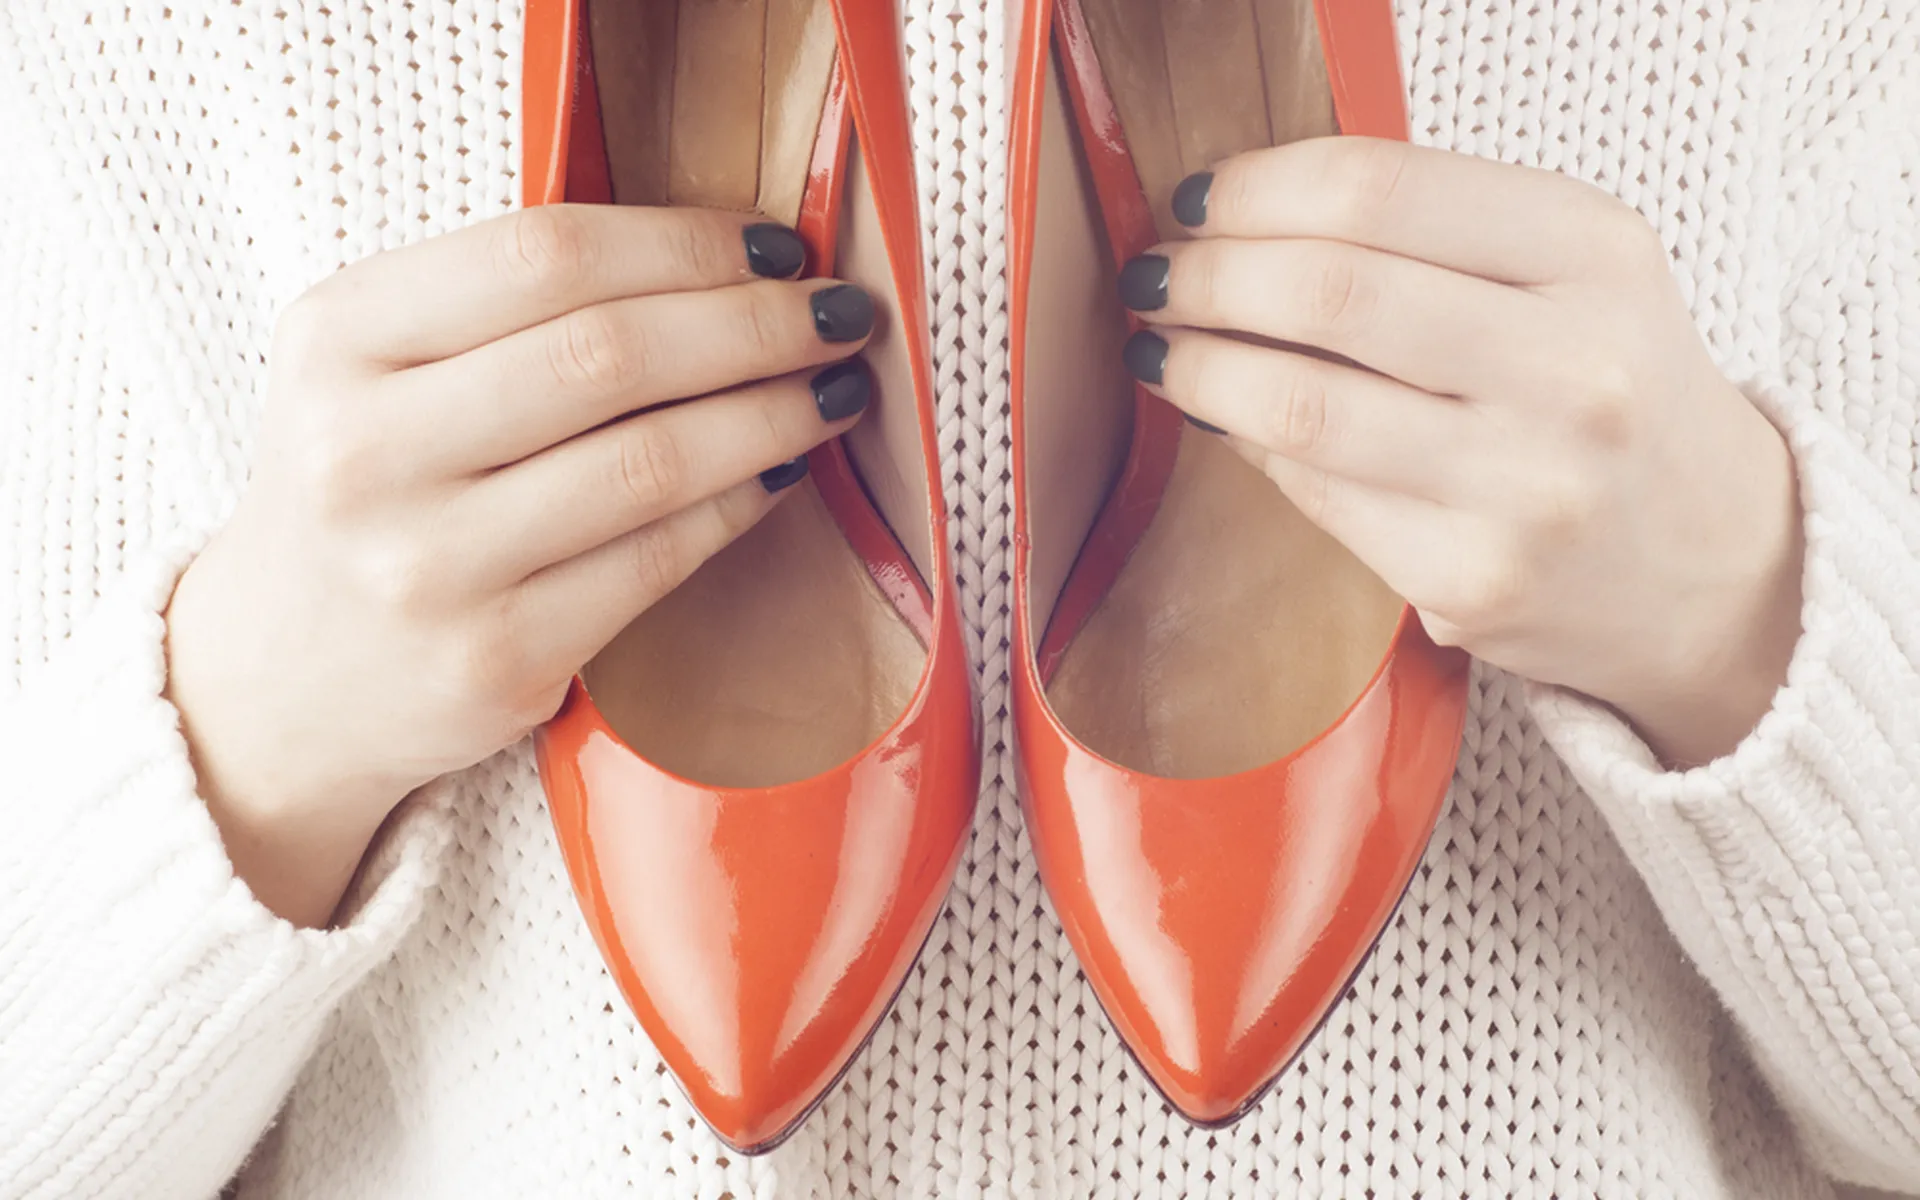 Why High Heels Are Harming Your Health